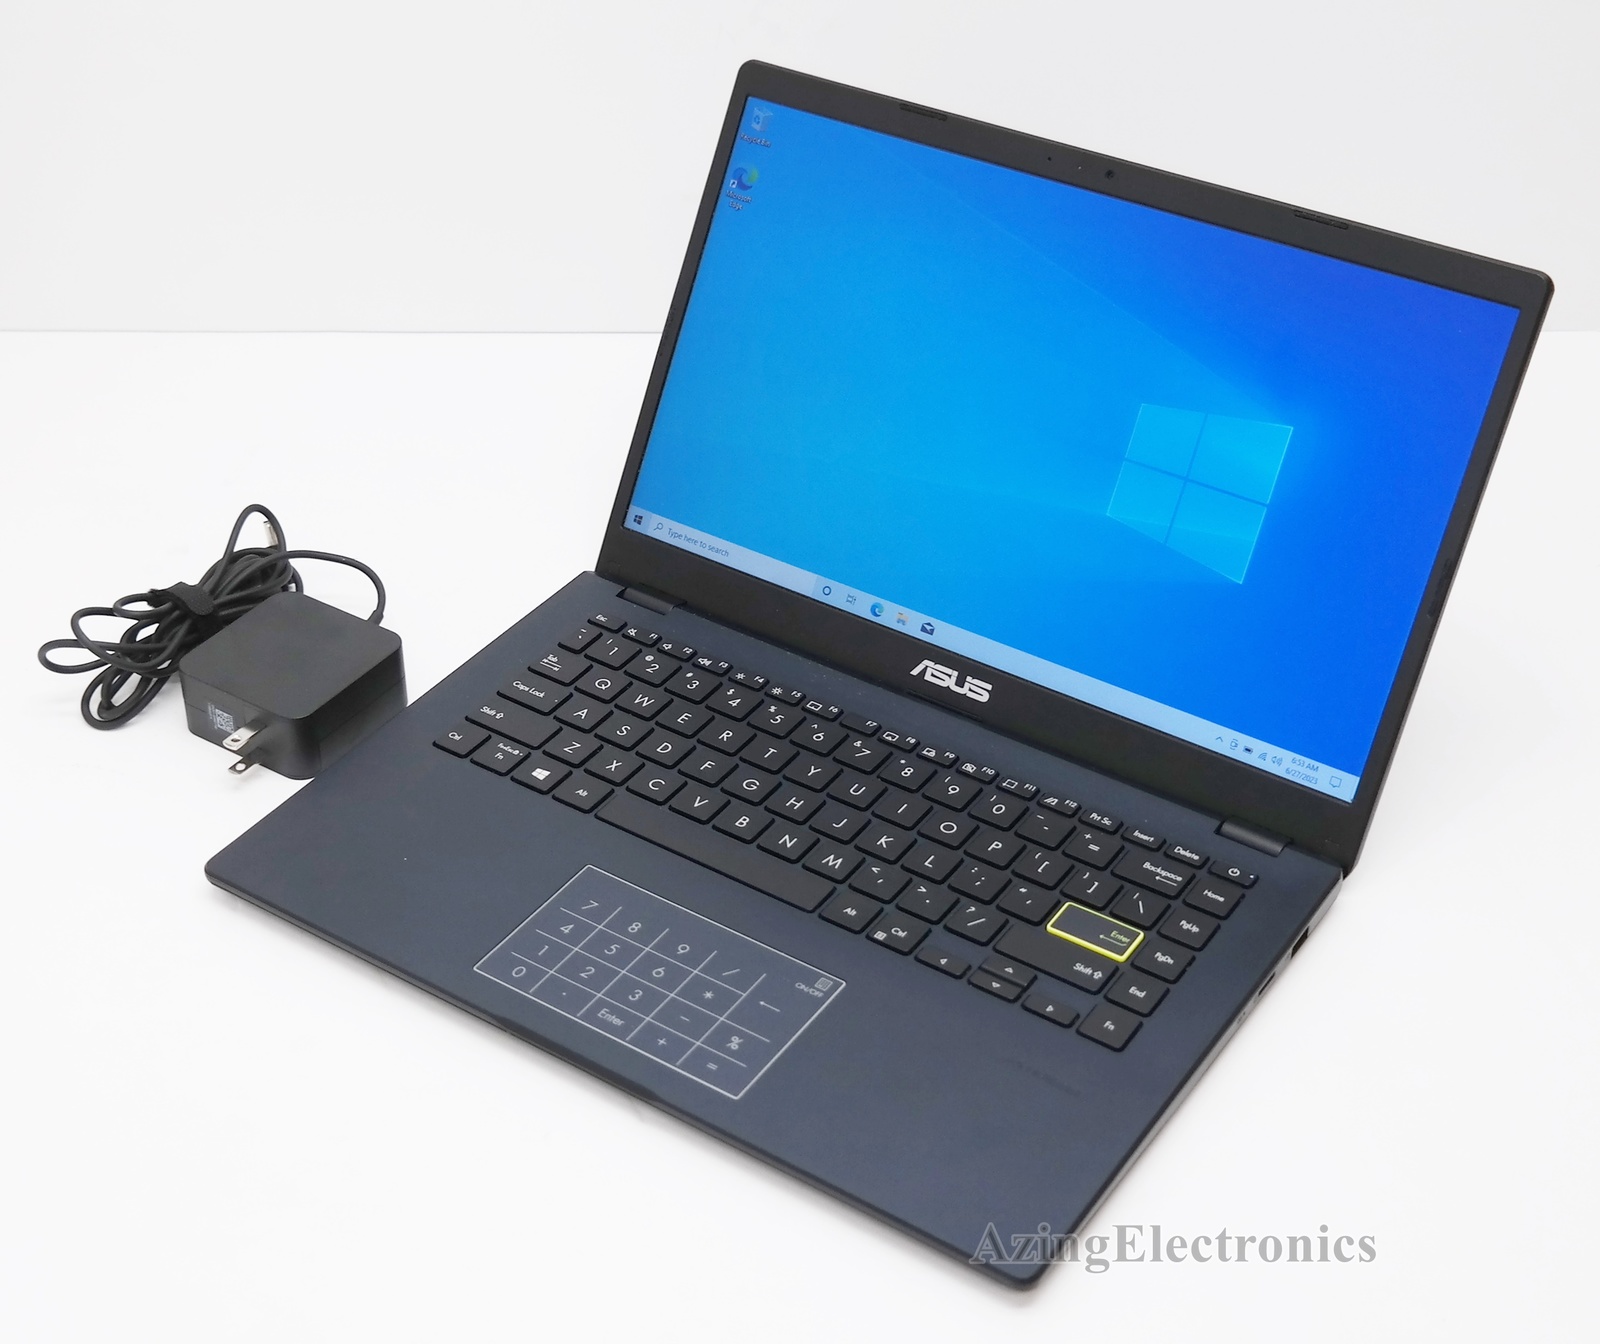 Asus E410ma 202blue 14 Celeron N4020 11ghz 4gb 128gb Ssd Pc Laptops And Netbooks 4639